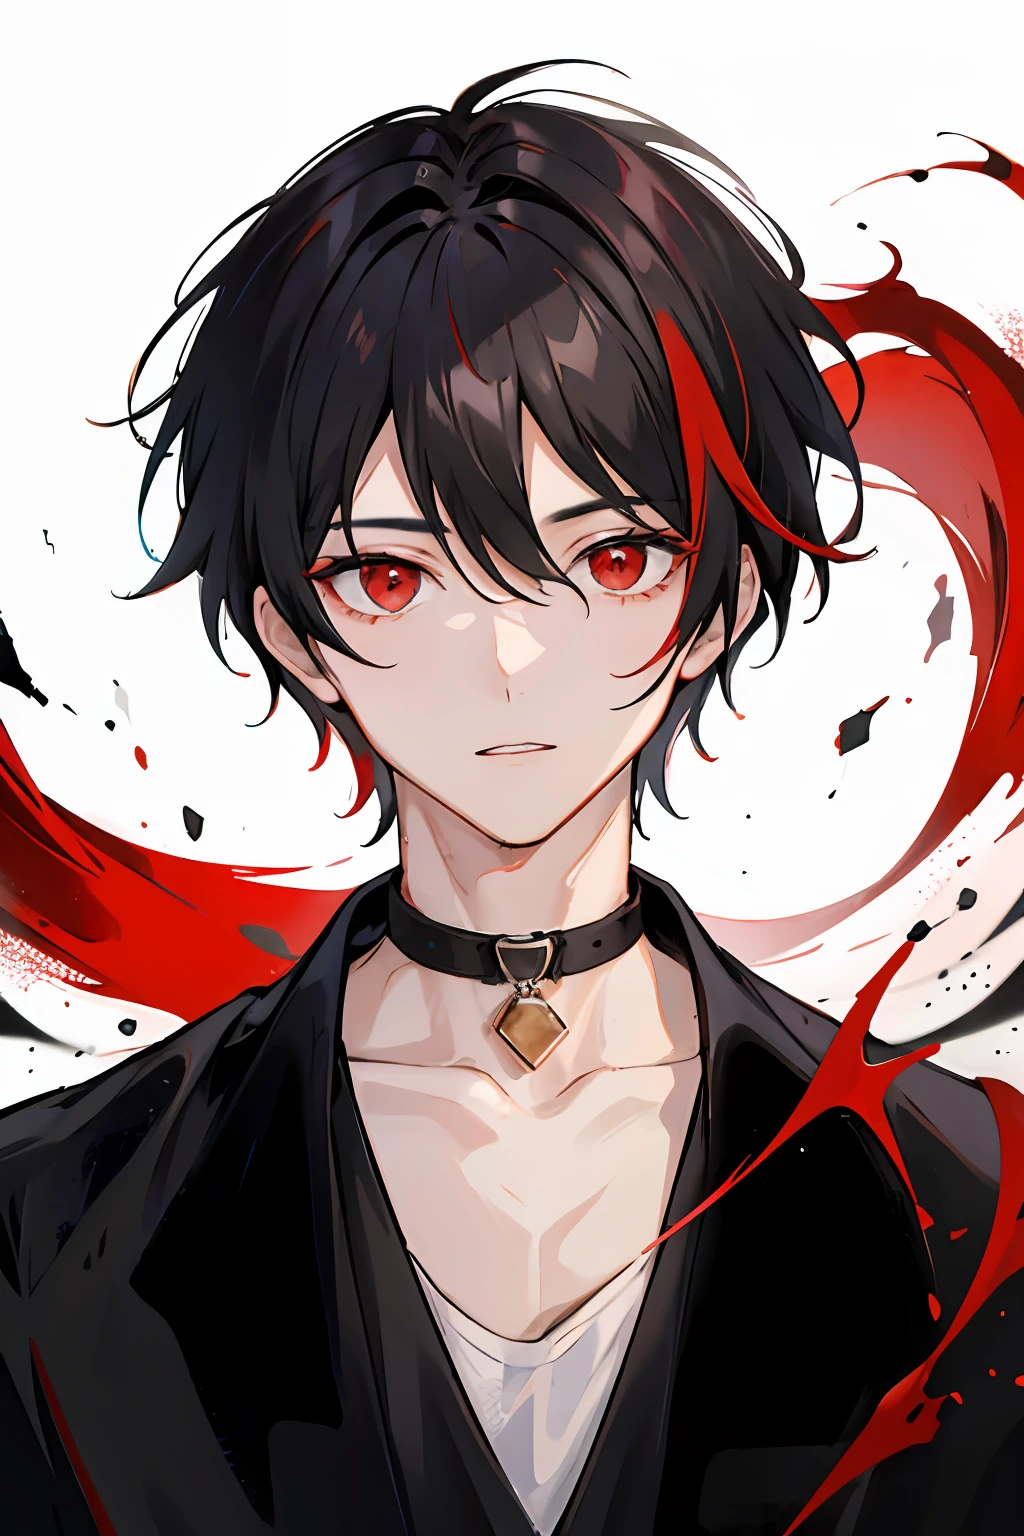 1 guy with short black hair, red eyes